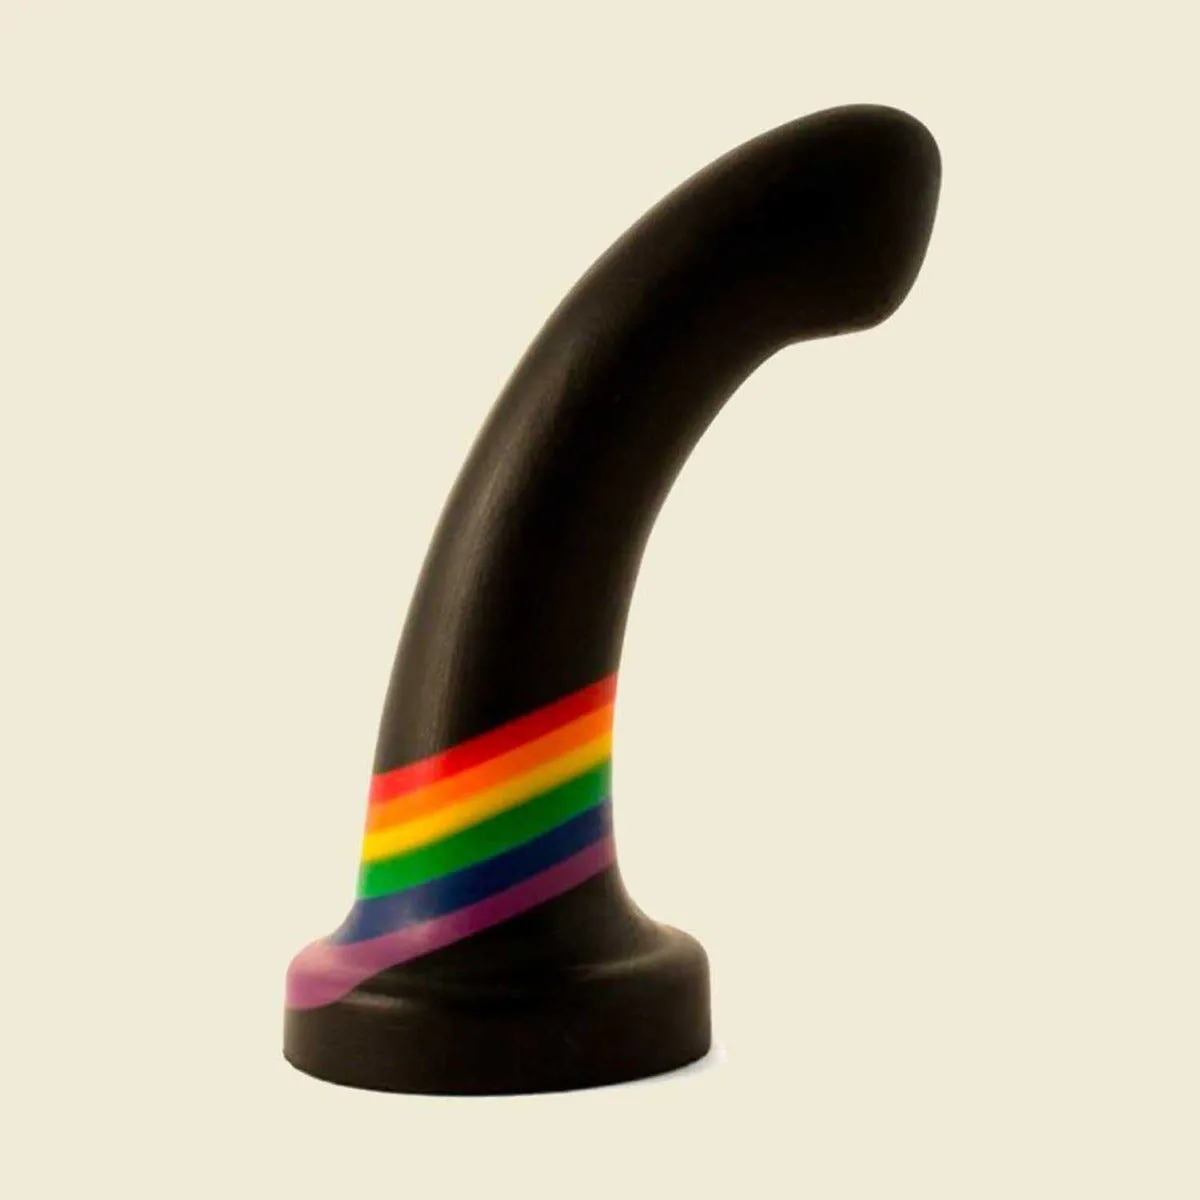 Rainbow Strap-On Dildo is a great strap-on for women